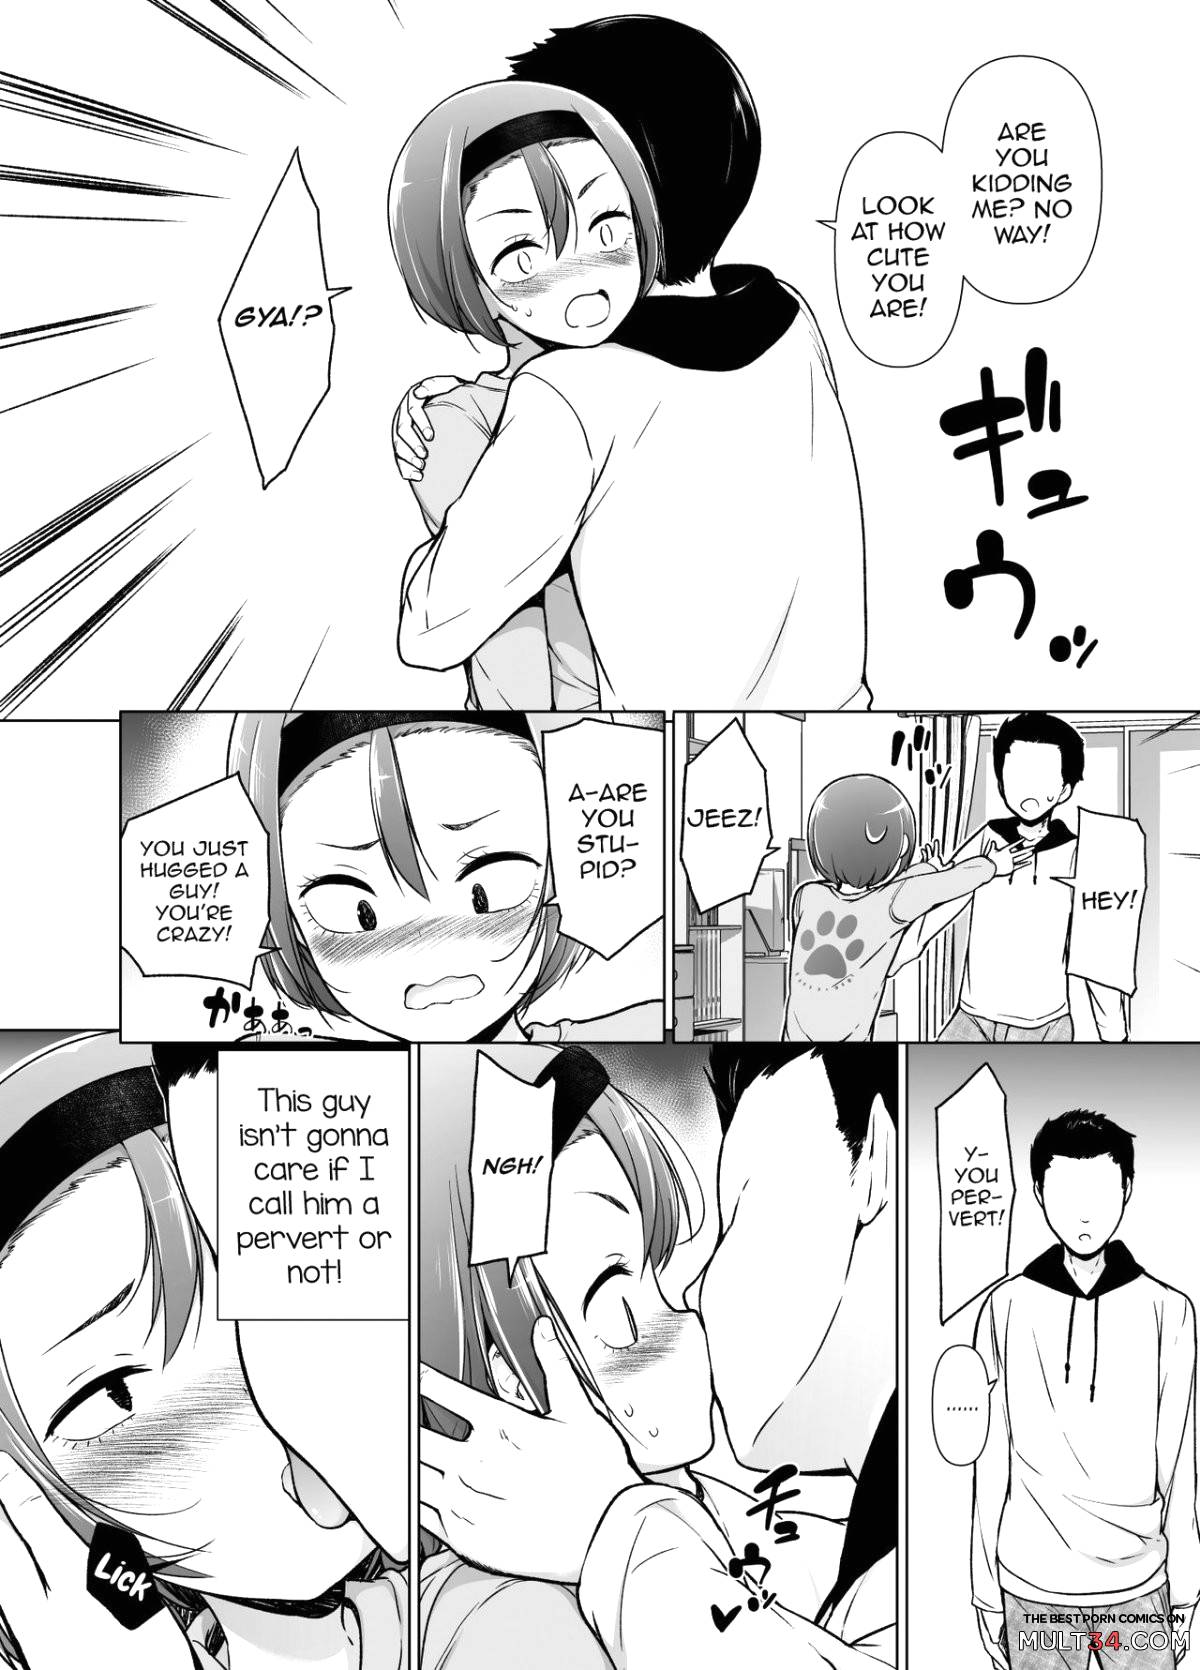 The Pervert page 13